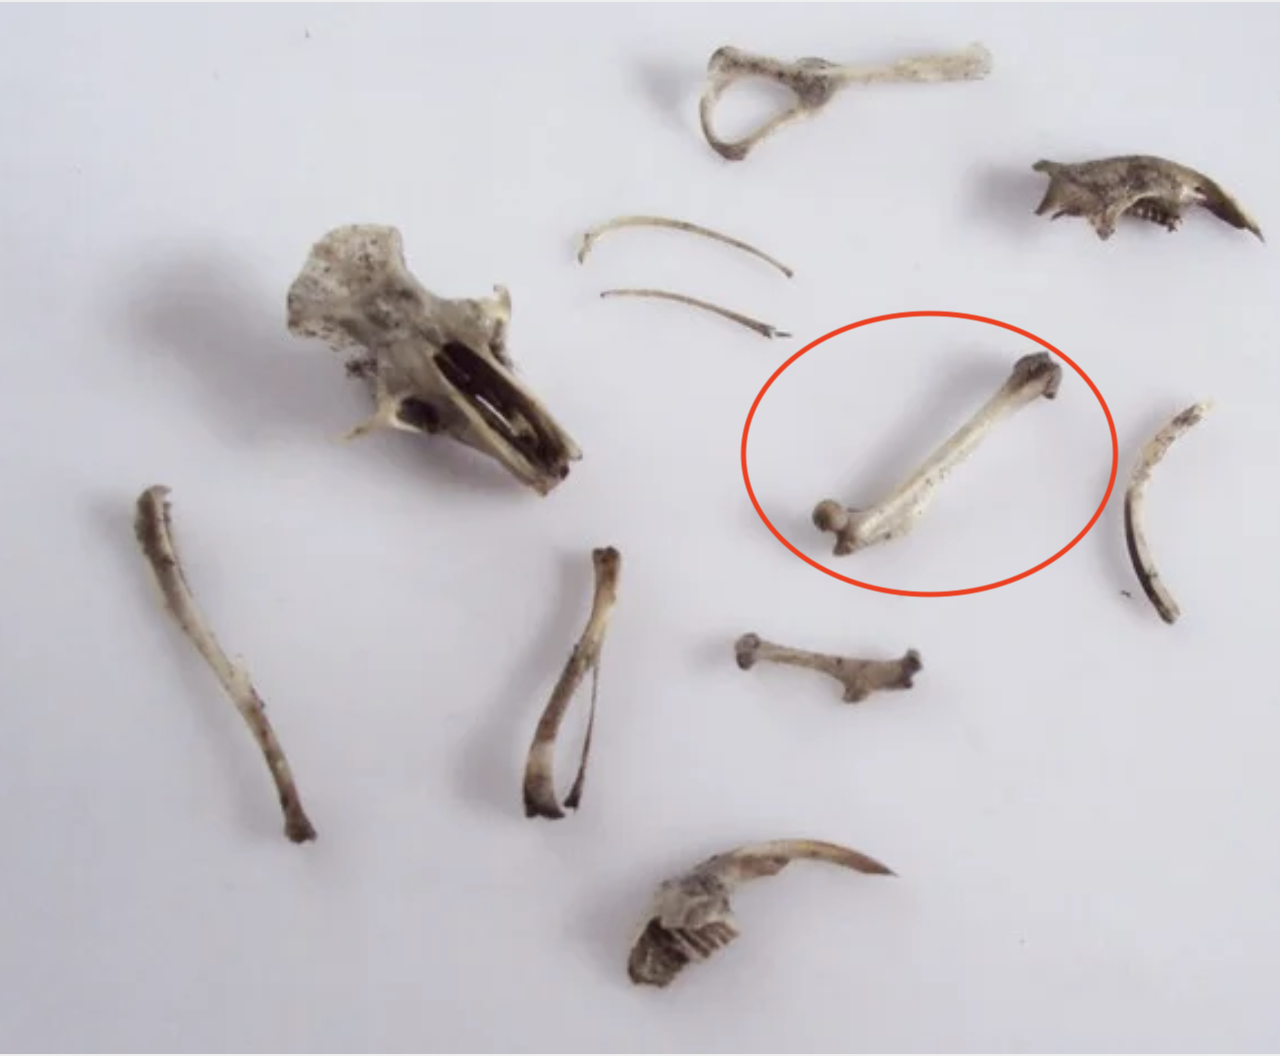 Bones you may find in an owl pellet. We are looking to weigh only the femur bones (within the red circle). [Click here for source](https://www.thingiverse.com/thing:1706812)